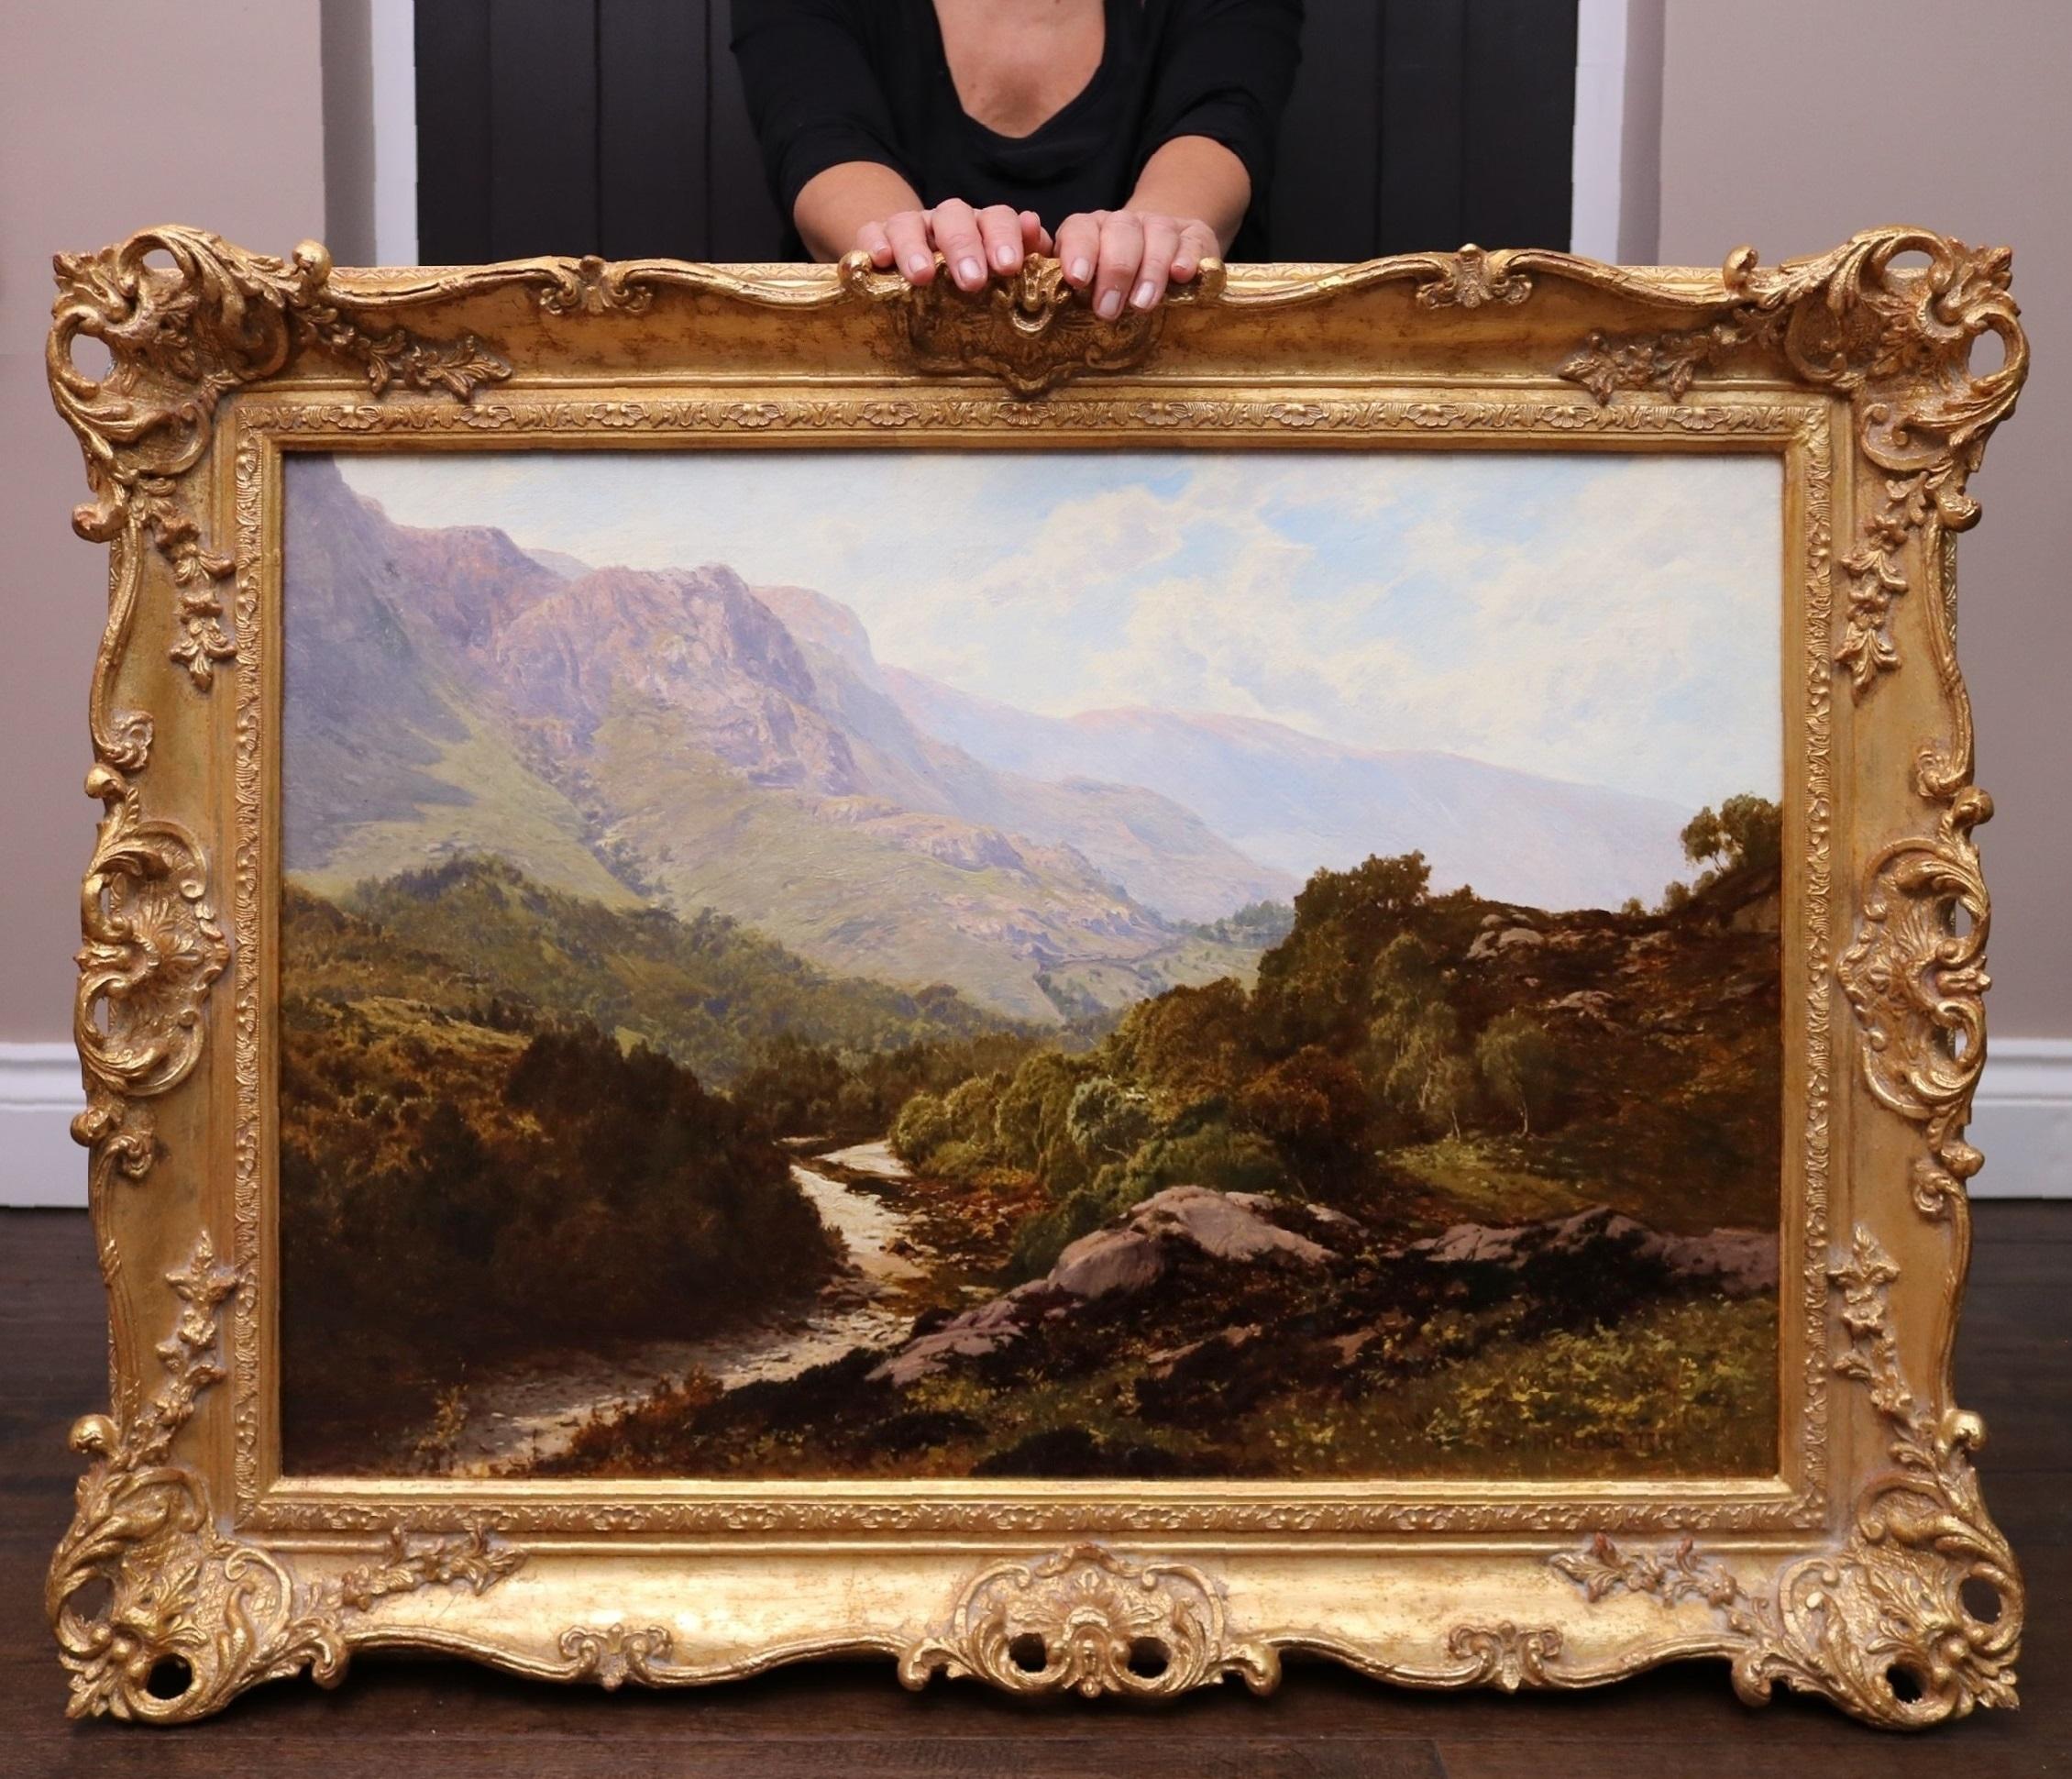 ‘The Pass of Aberglaslyn, Beddgelert, North Wales’ by Edward Henry Holder (1847-1922). The painting is signed by the artist and dated 1888. Exhibited at the Royal Society of British Artists in London. Presented in a fine quality, bespoke gold metal